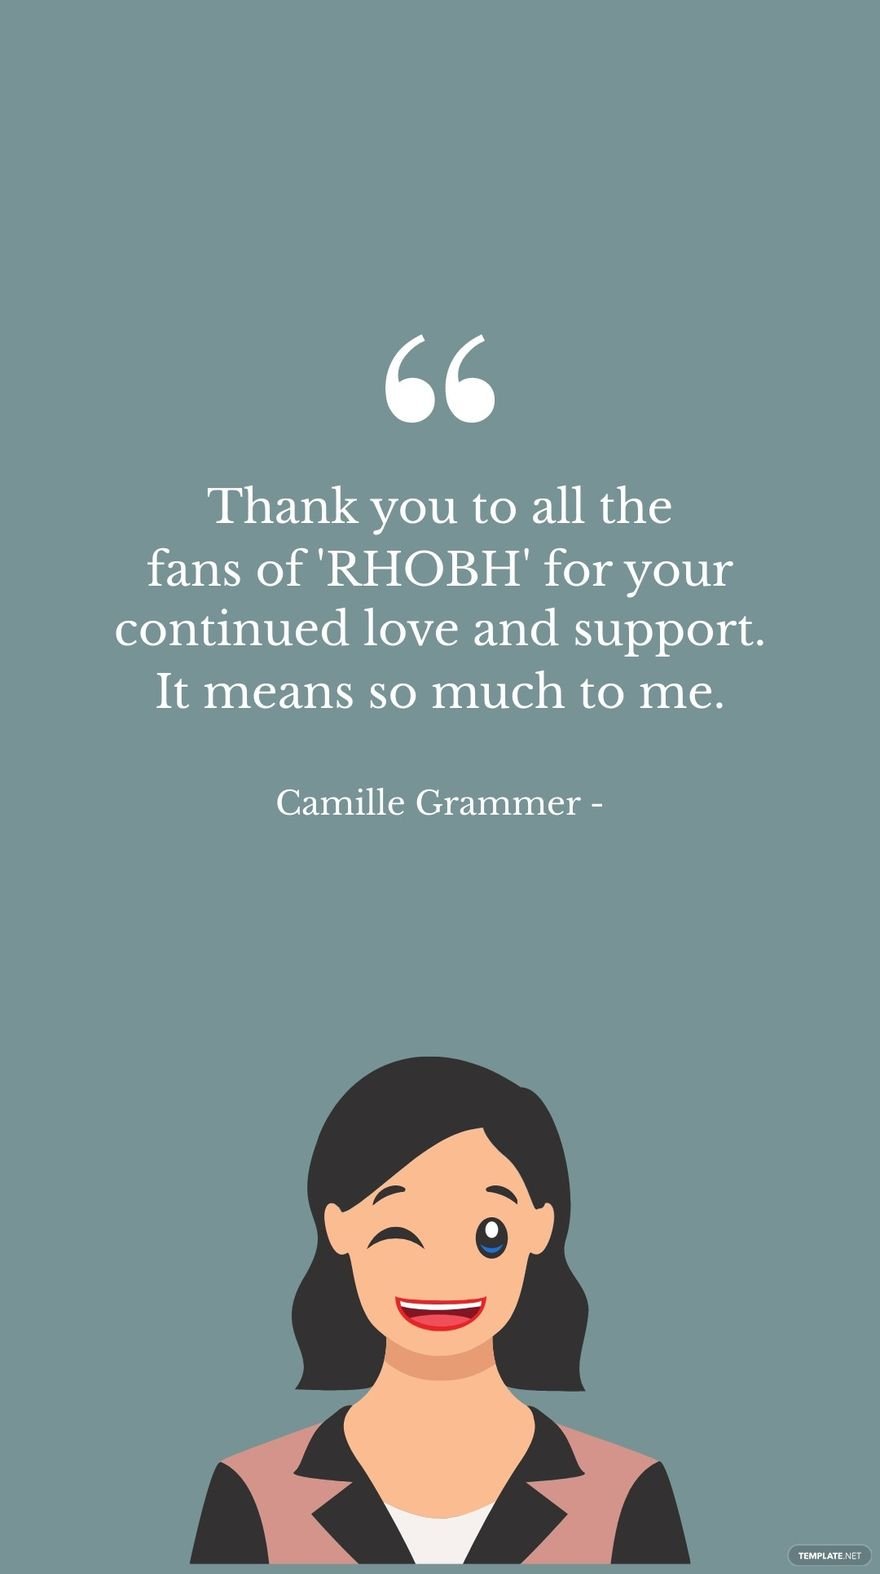 Camille Grammer - Thank you to all the fans of 'RHOBH' for your continued love and support. It means so much to me.